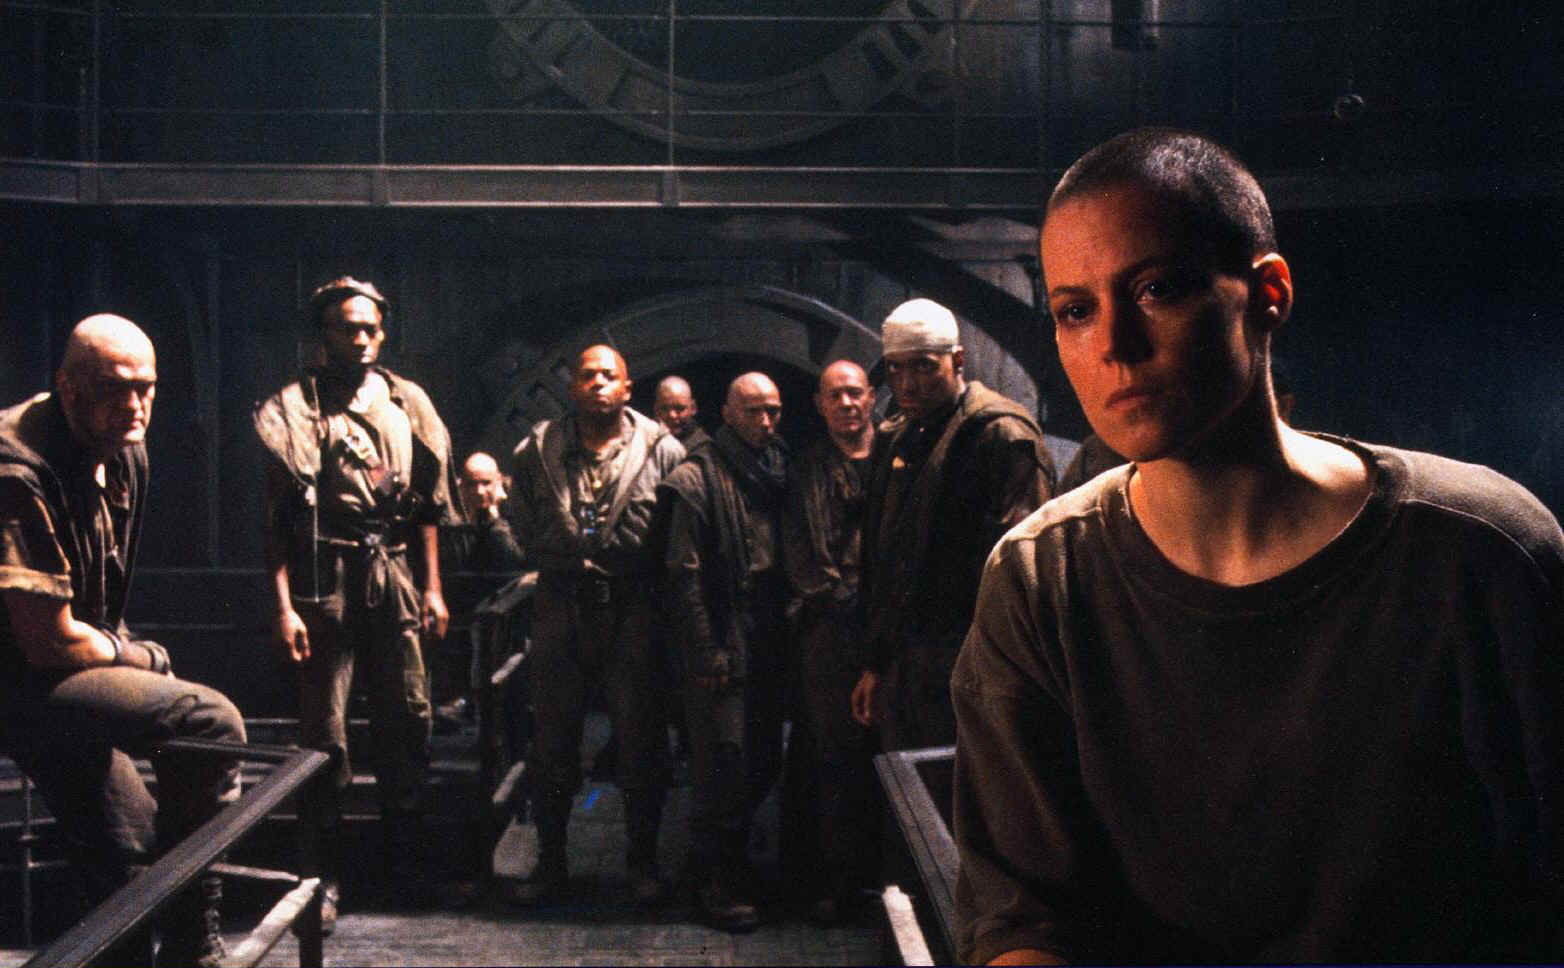  The ambitious but doomed  Alien 3,  for which Sigourney Weaver was persuaded to shave her head. The making-of documentary  Wreckage and Rage  from the Alien Quadrilogy Blu-ray set is better than the film itself. 